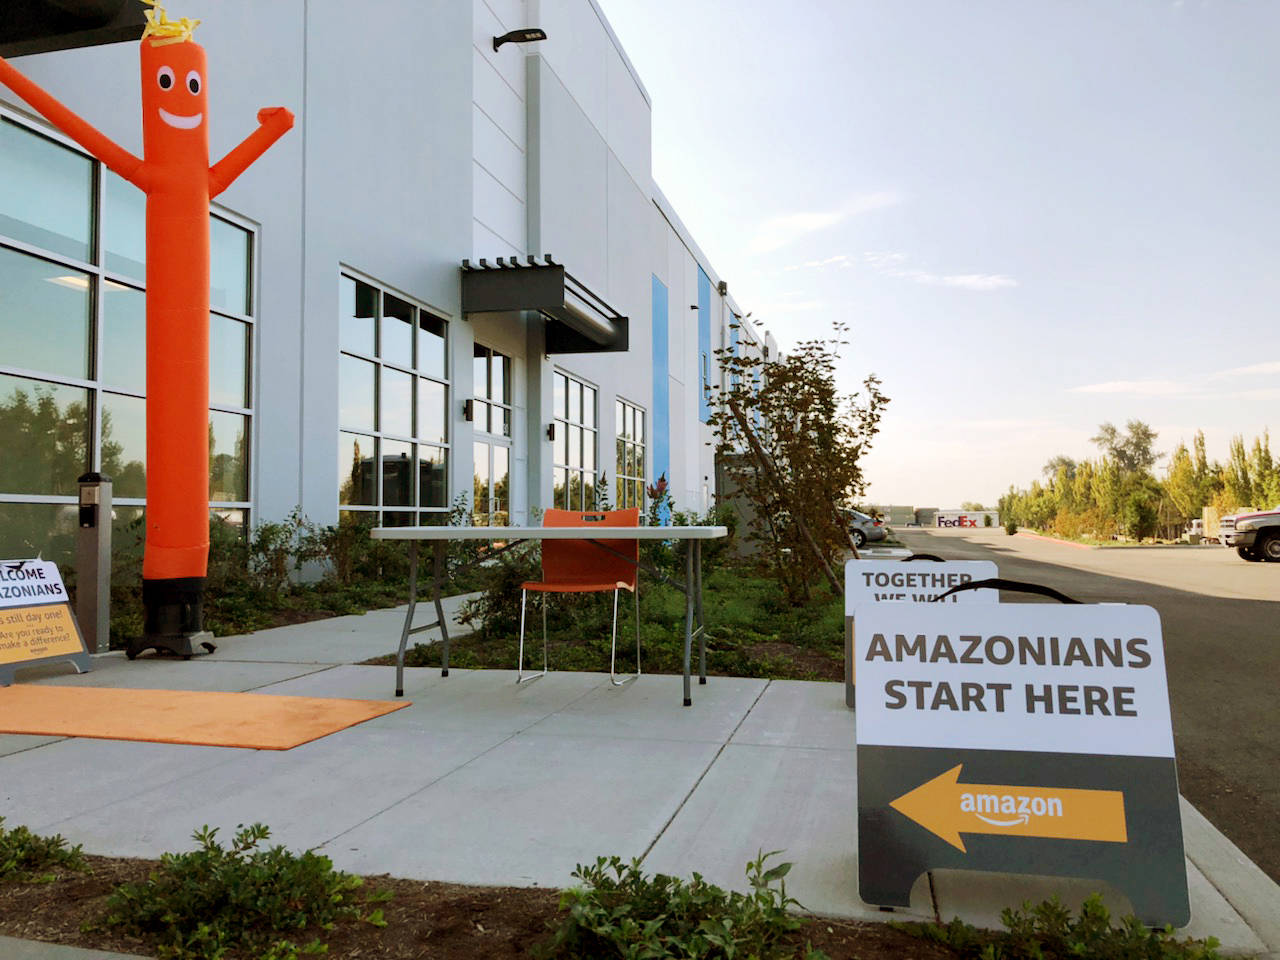 The 100,000-square-foot Amazon fulfillment/delivery center at the Port of Everett’s Riverside Business Park is expected to hire hundreds of workers. (Janice Podsada/Everett Daily Herald)